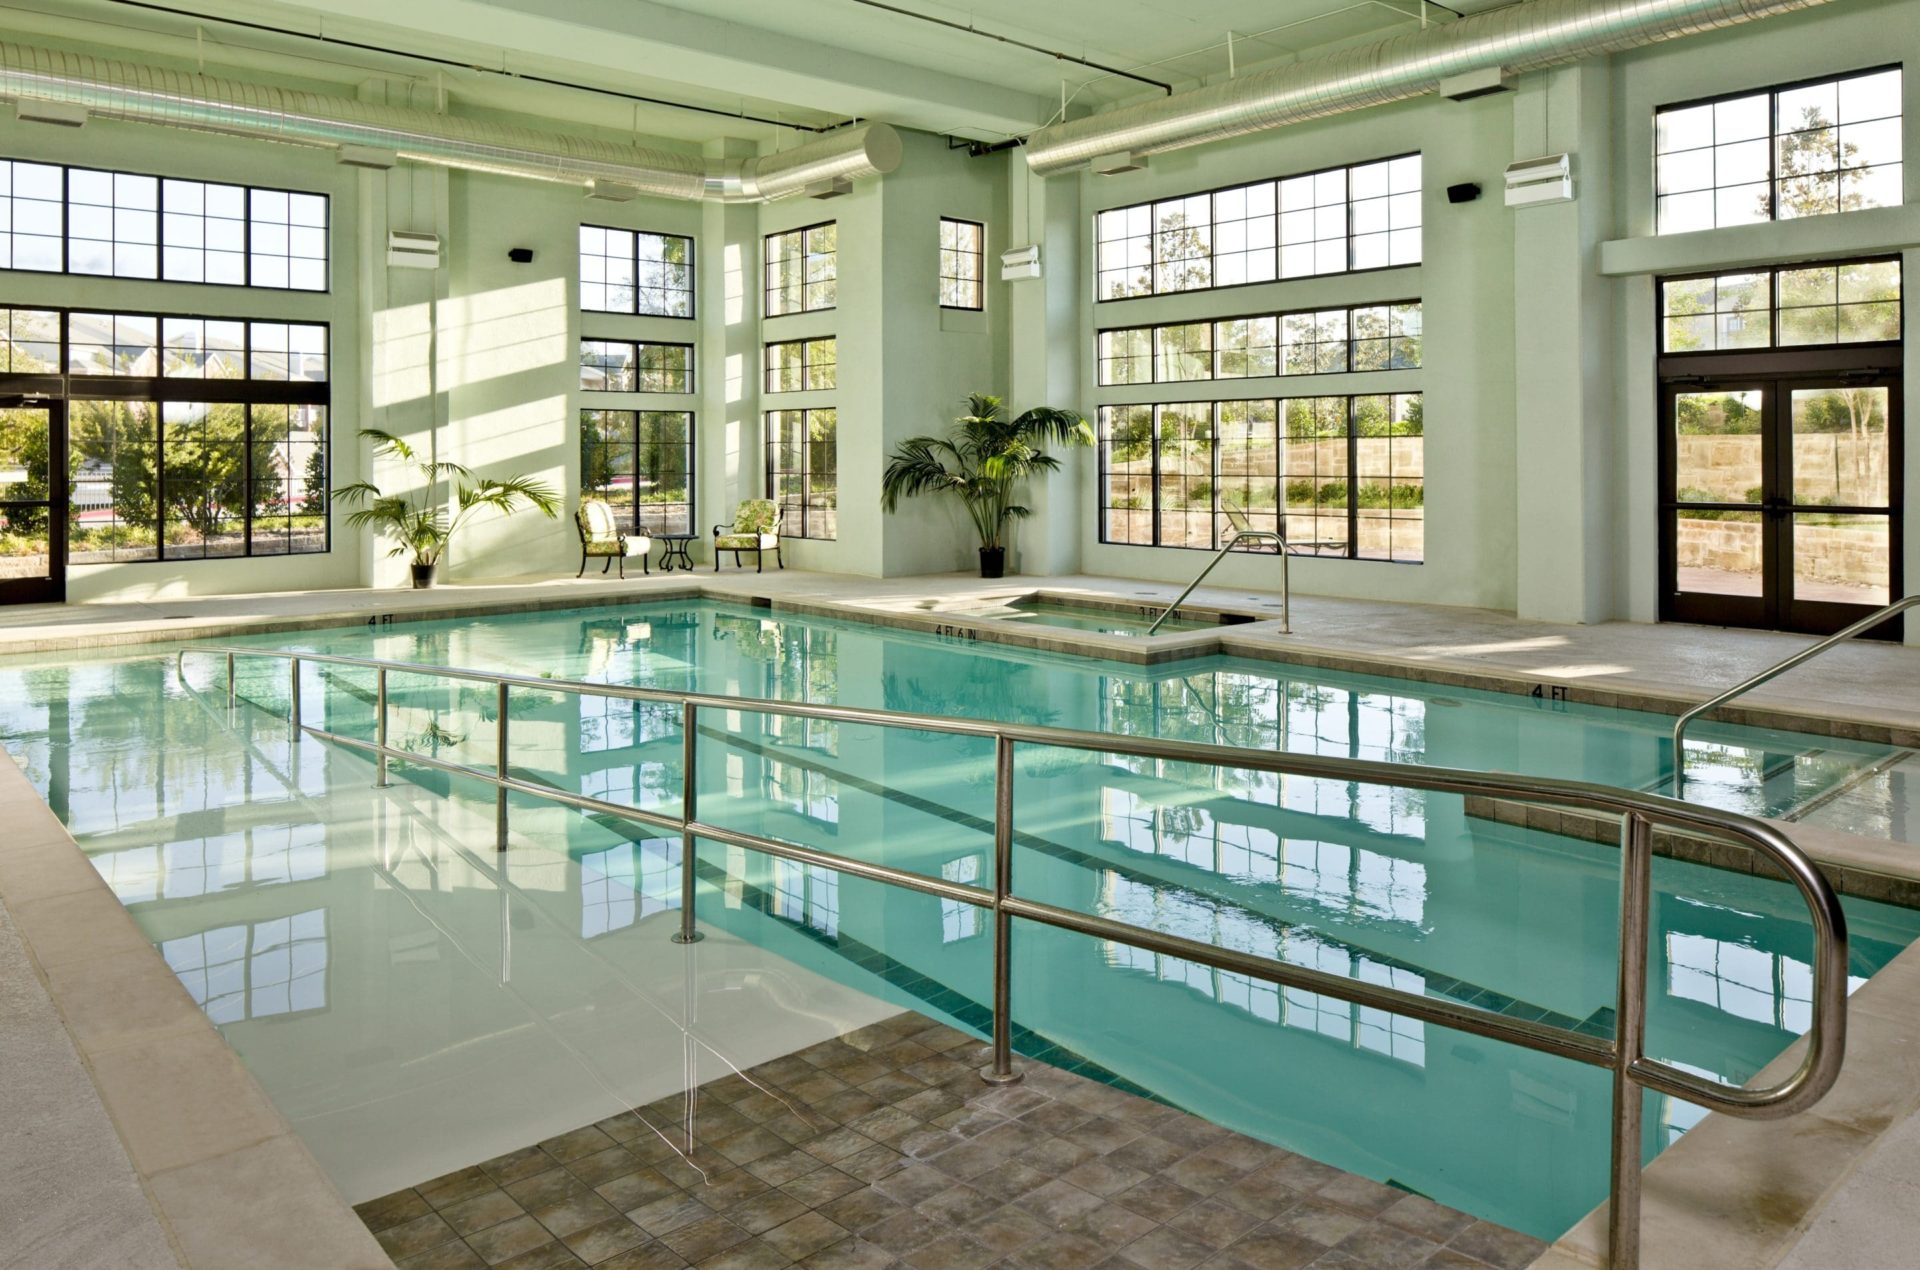 Indoor pool with access ramp at Tradition Senior Living - Prestonwood in Dallas, TX.